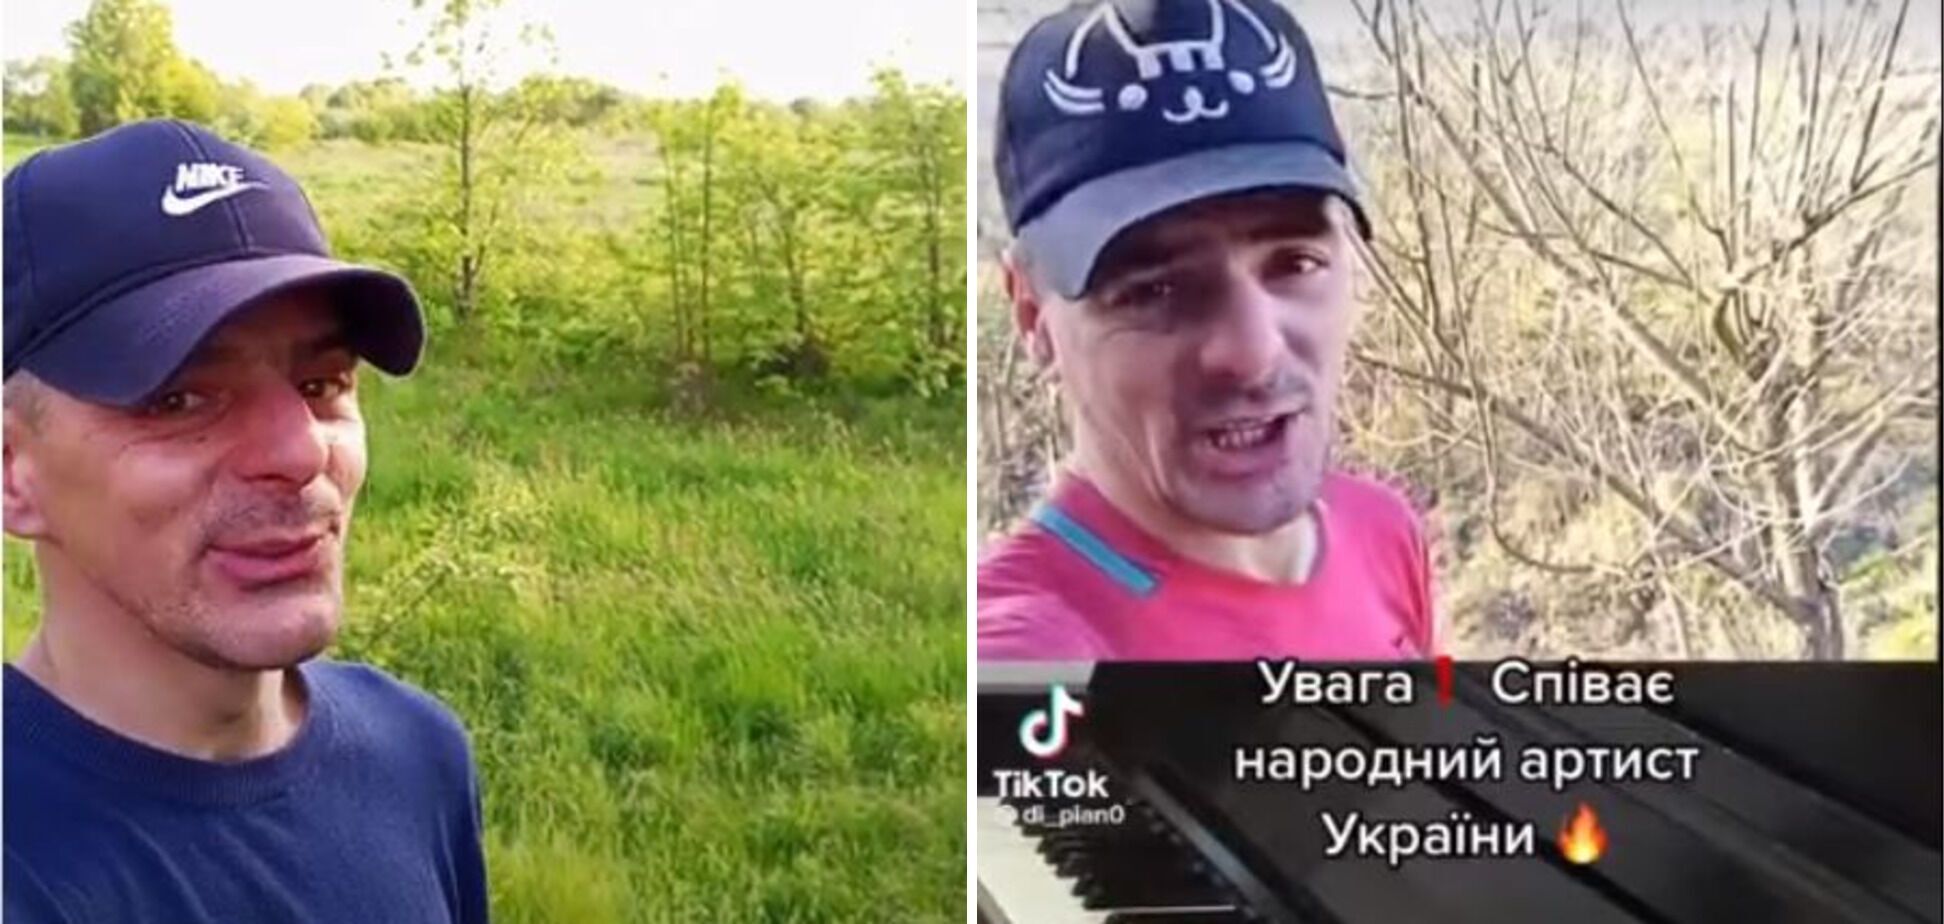 How the X-Factor star Andriy Matsevko lives: photos with fans for money, work as a janitor, fake documents and a criminal case